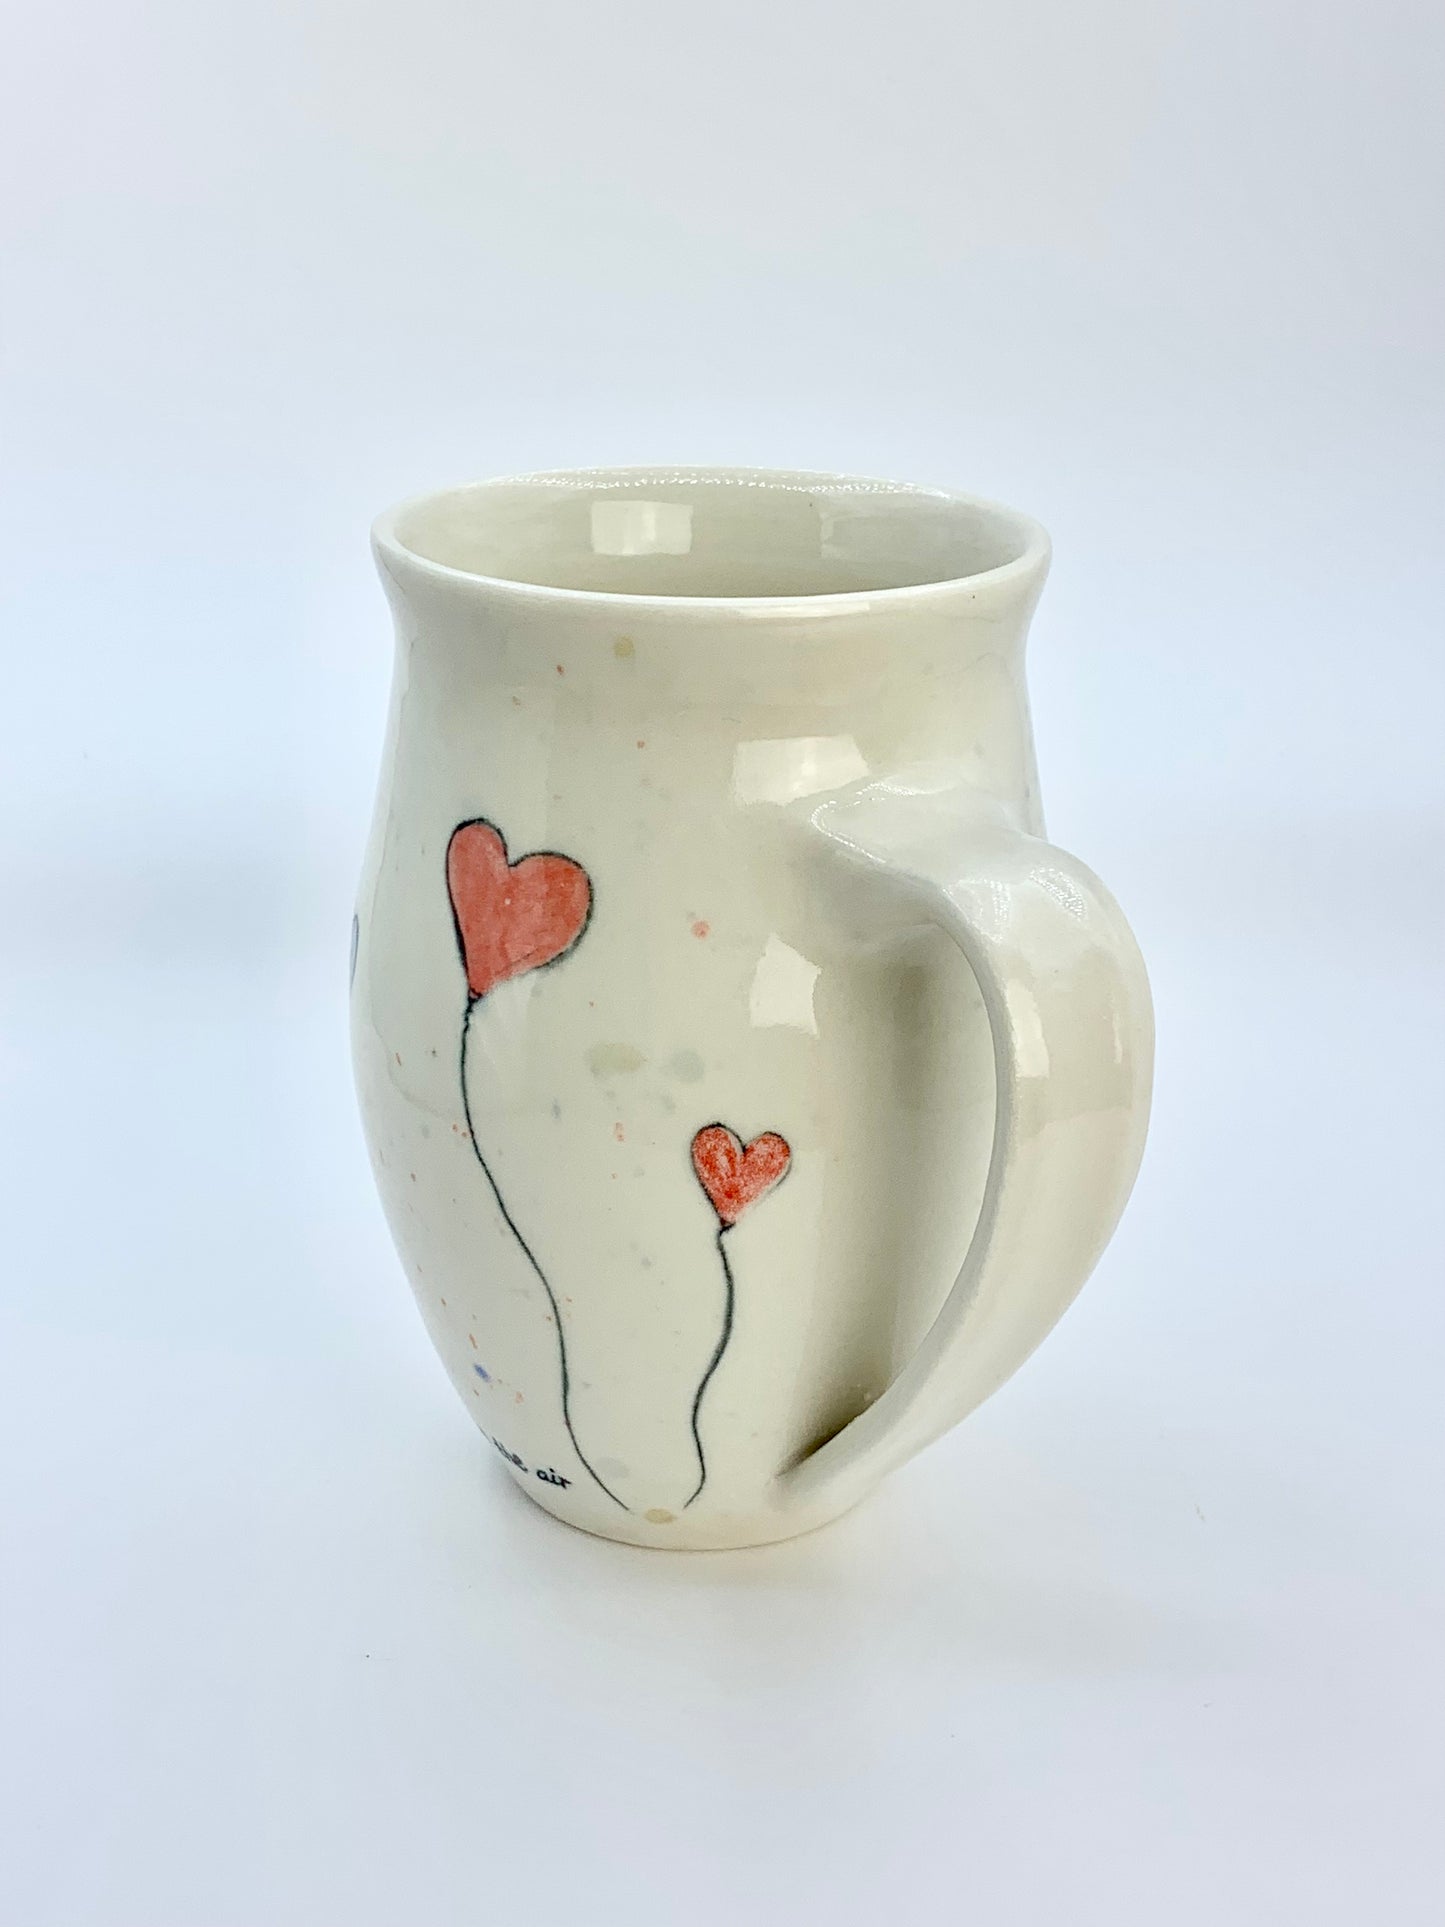 16 oz large porcelain mug with hand painted heart balloons